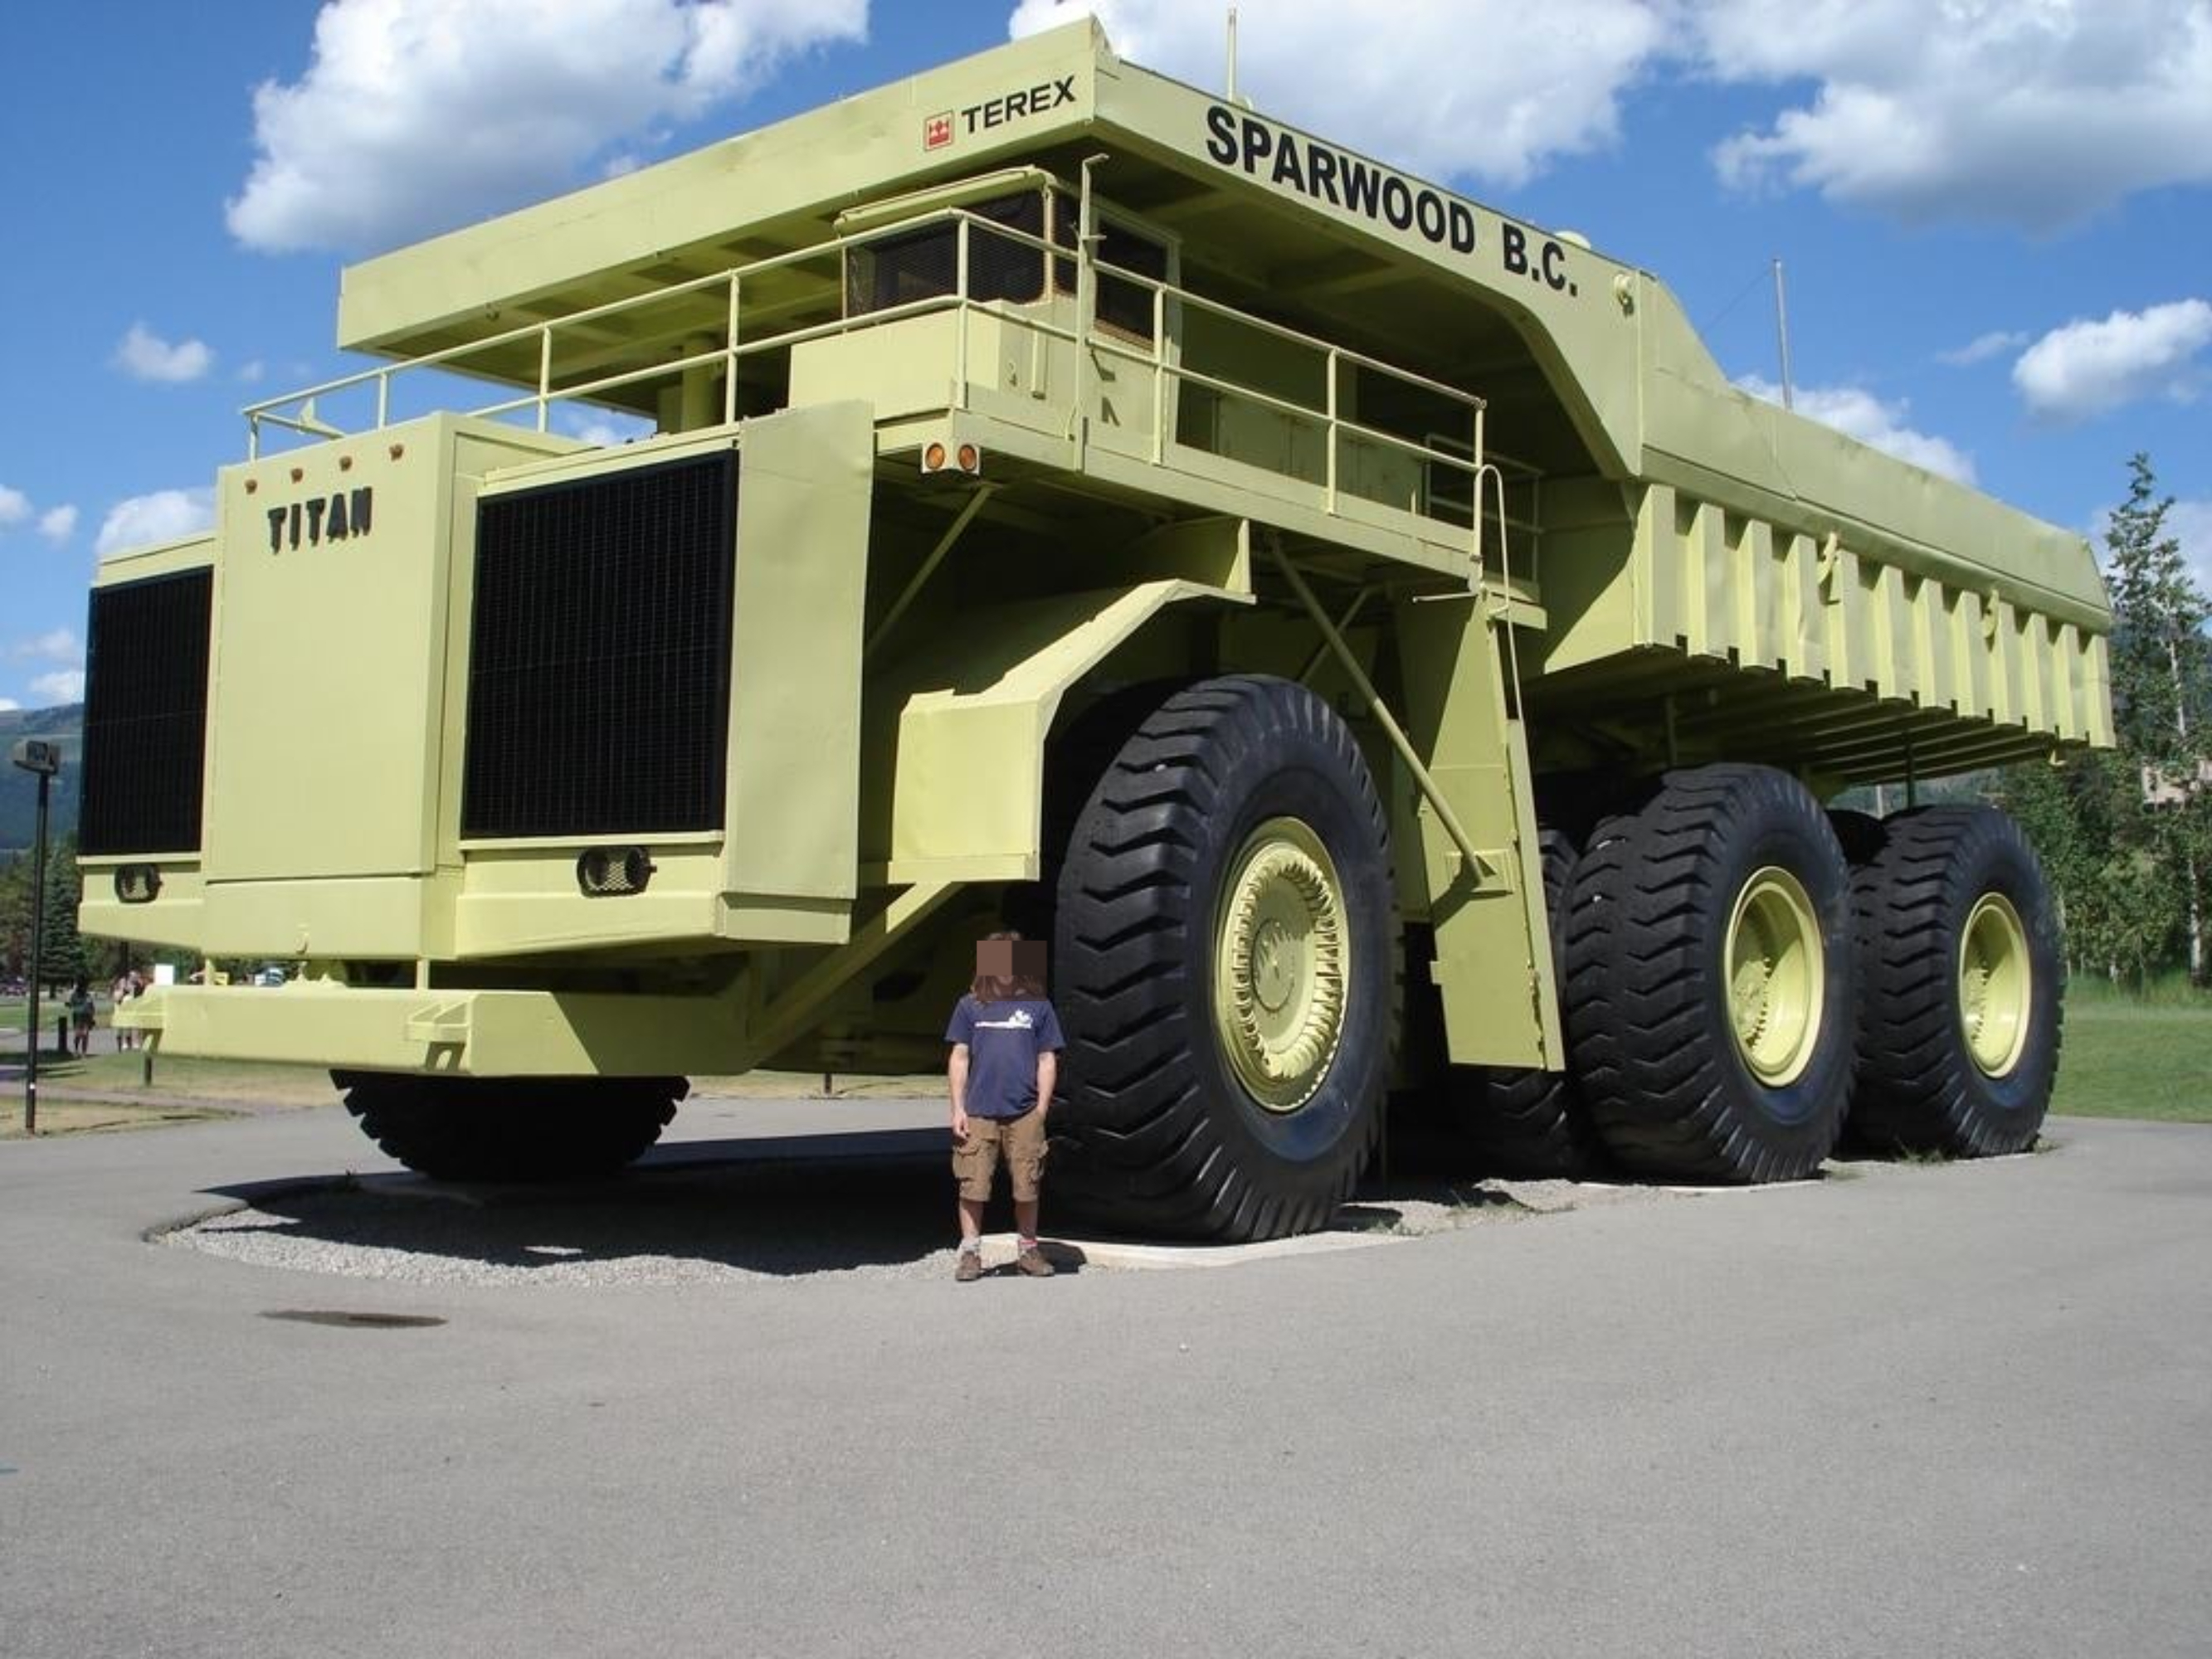 A person standing next to the truck — the person reaches about half the height of the wheel